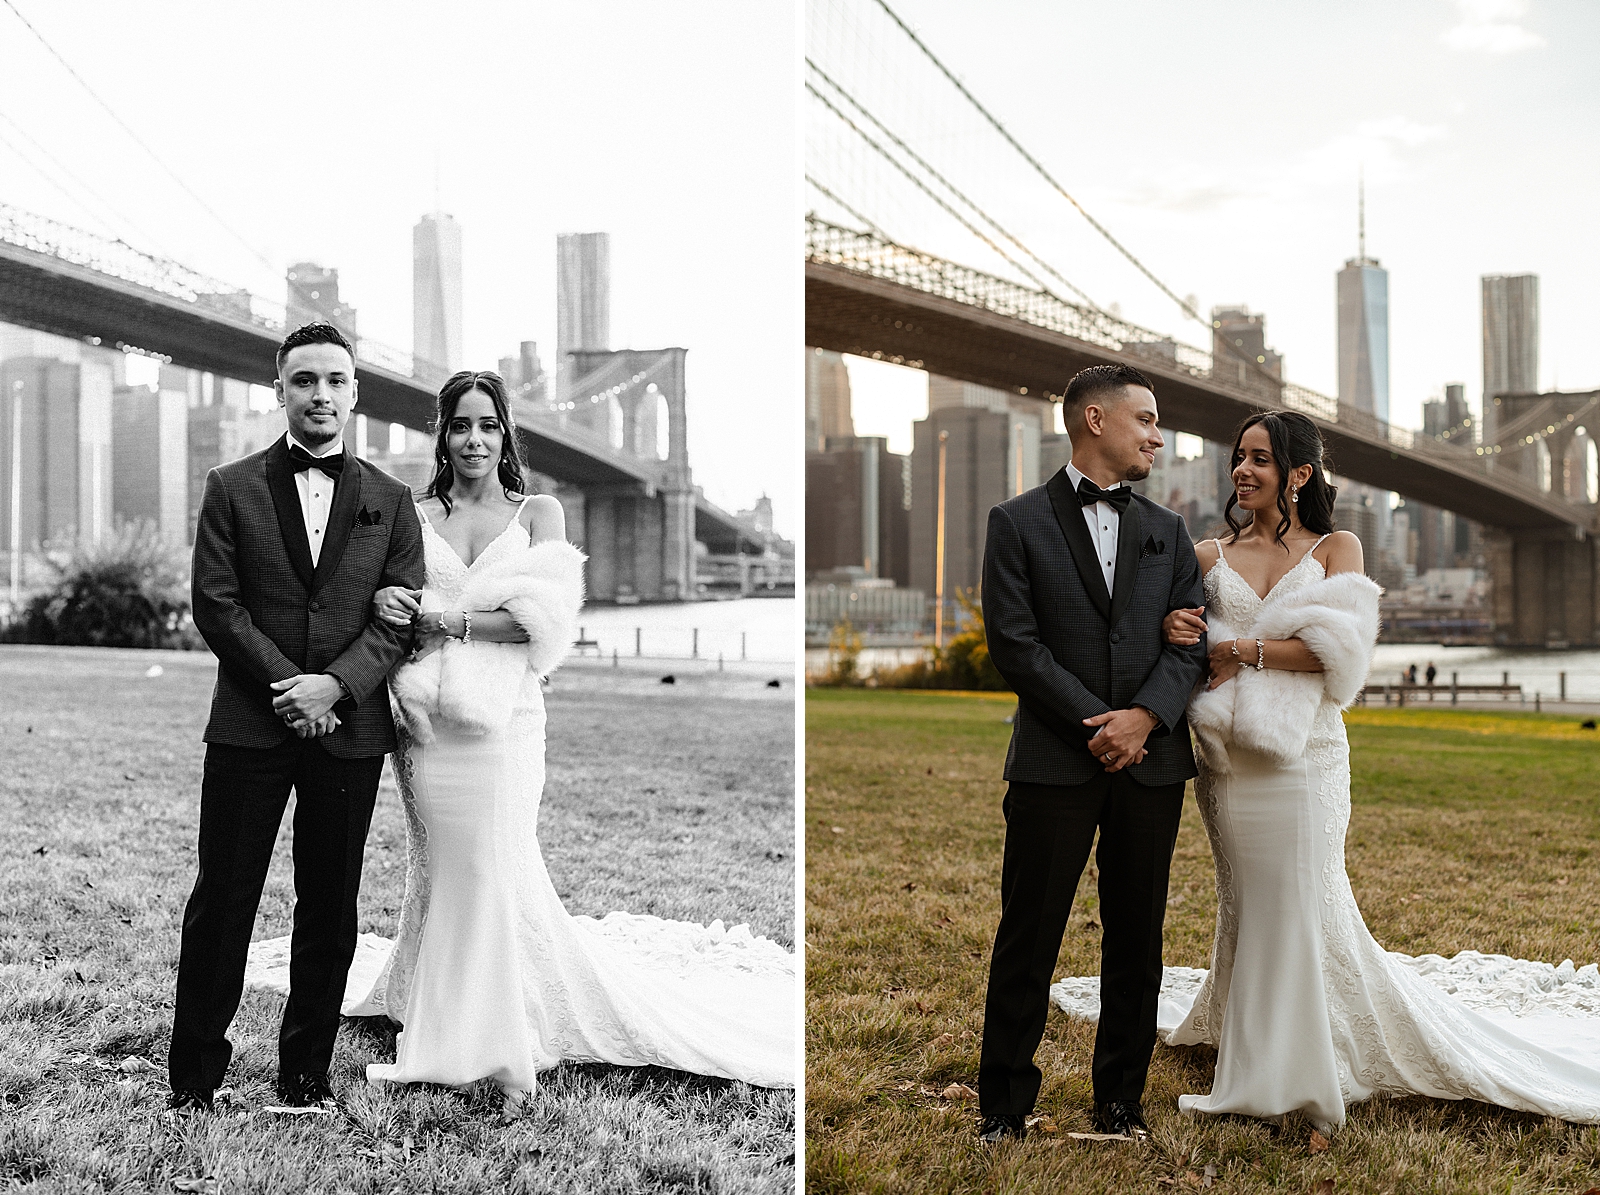 B&W portrait of Bride and Groom arm in arm in front of NYC Bridge